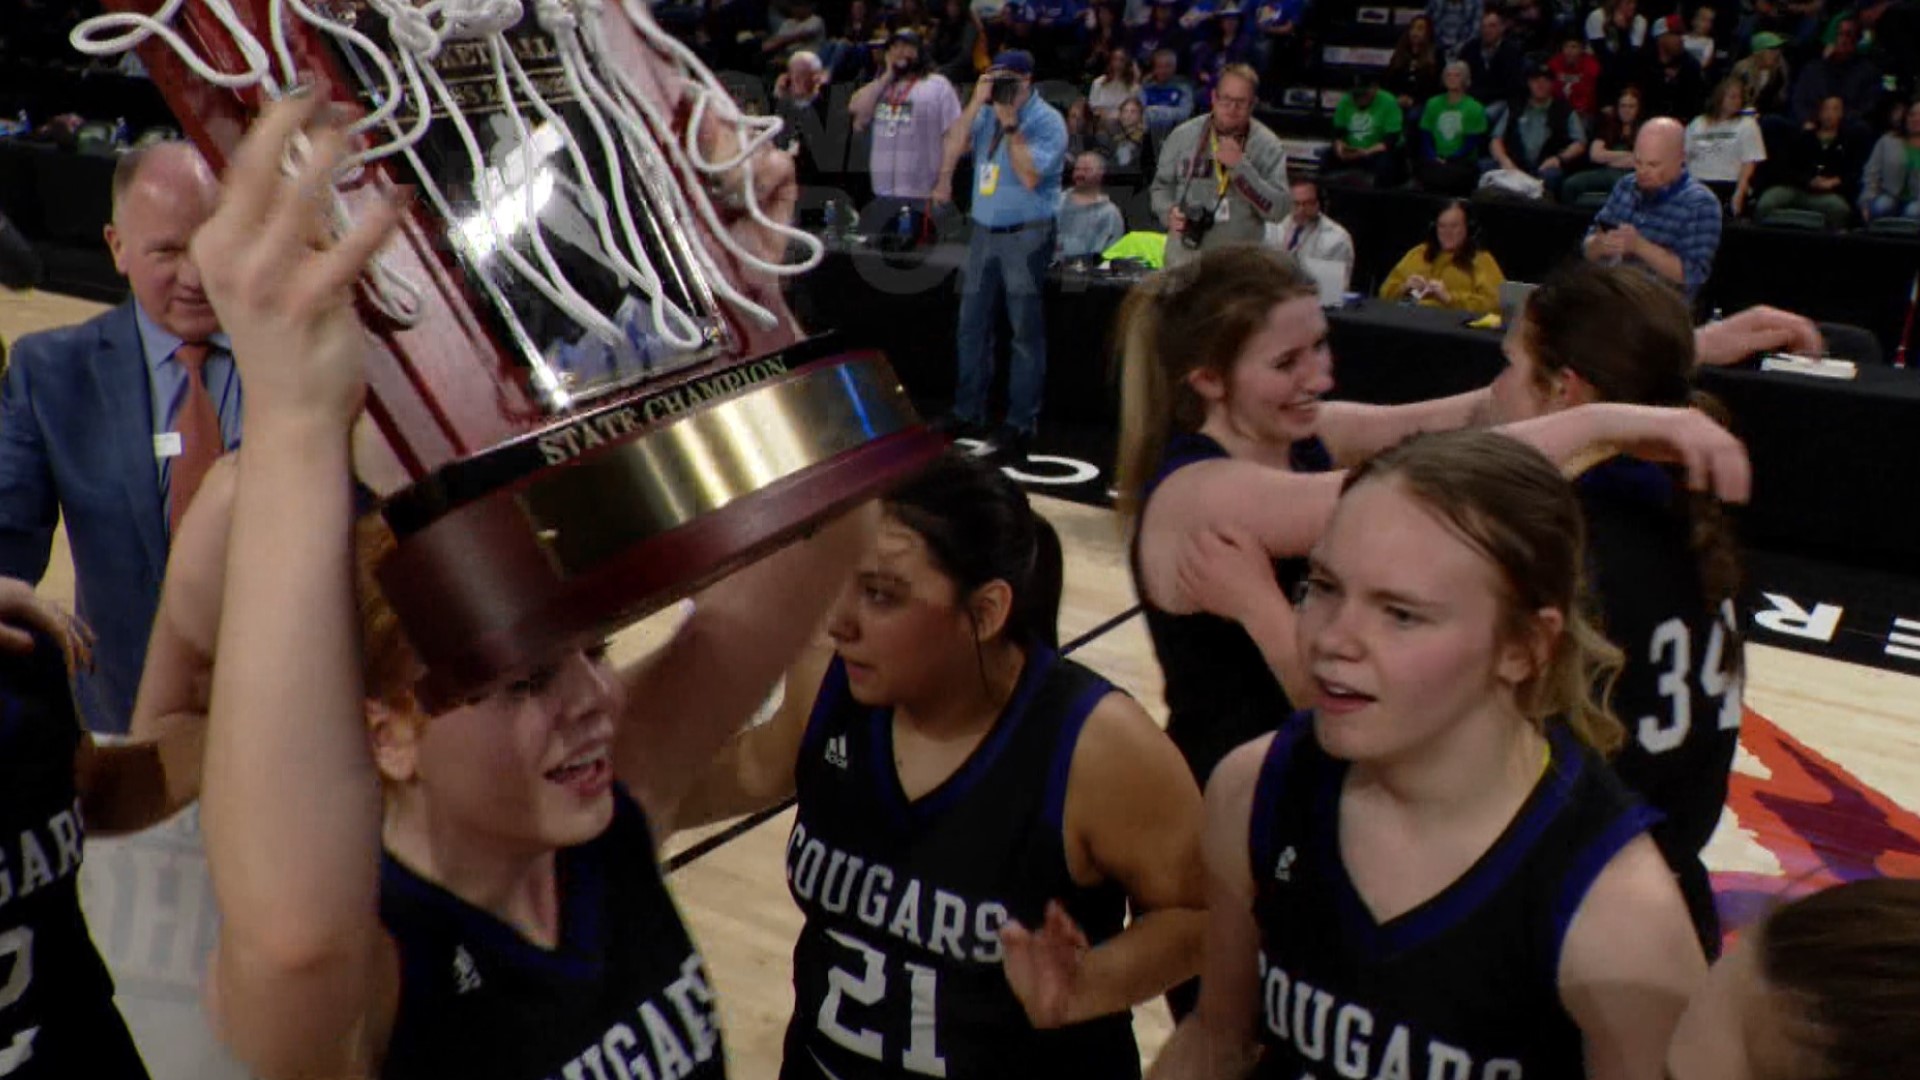 The Cougars captured their first state title in program history by holding off Merino 47-43 in the Class 2A championship game.